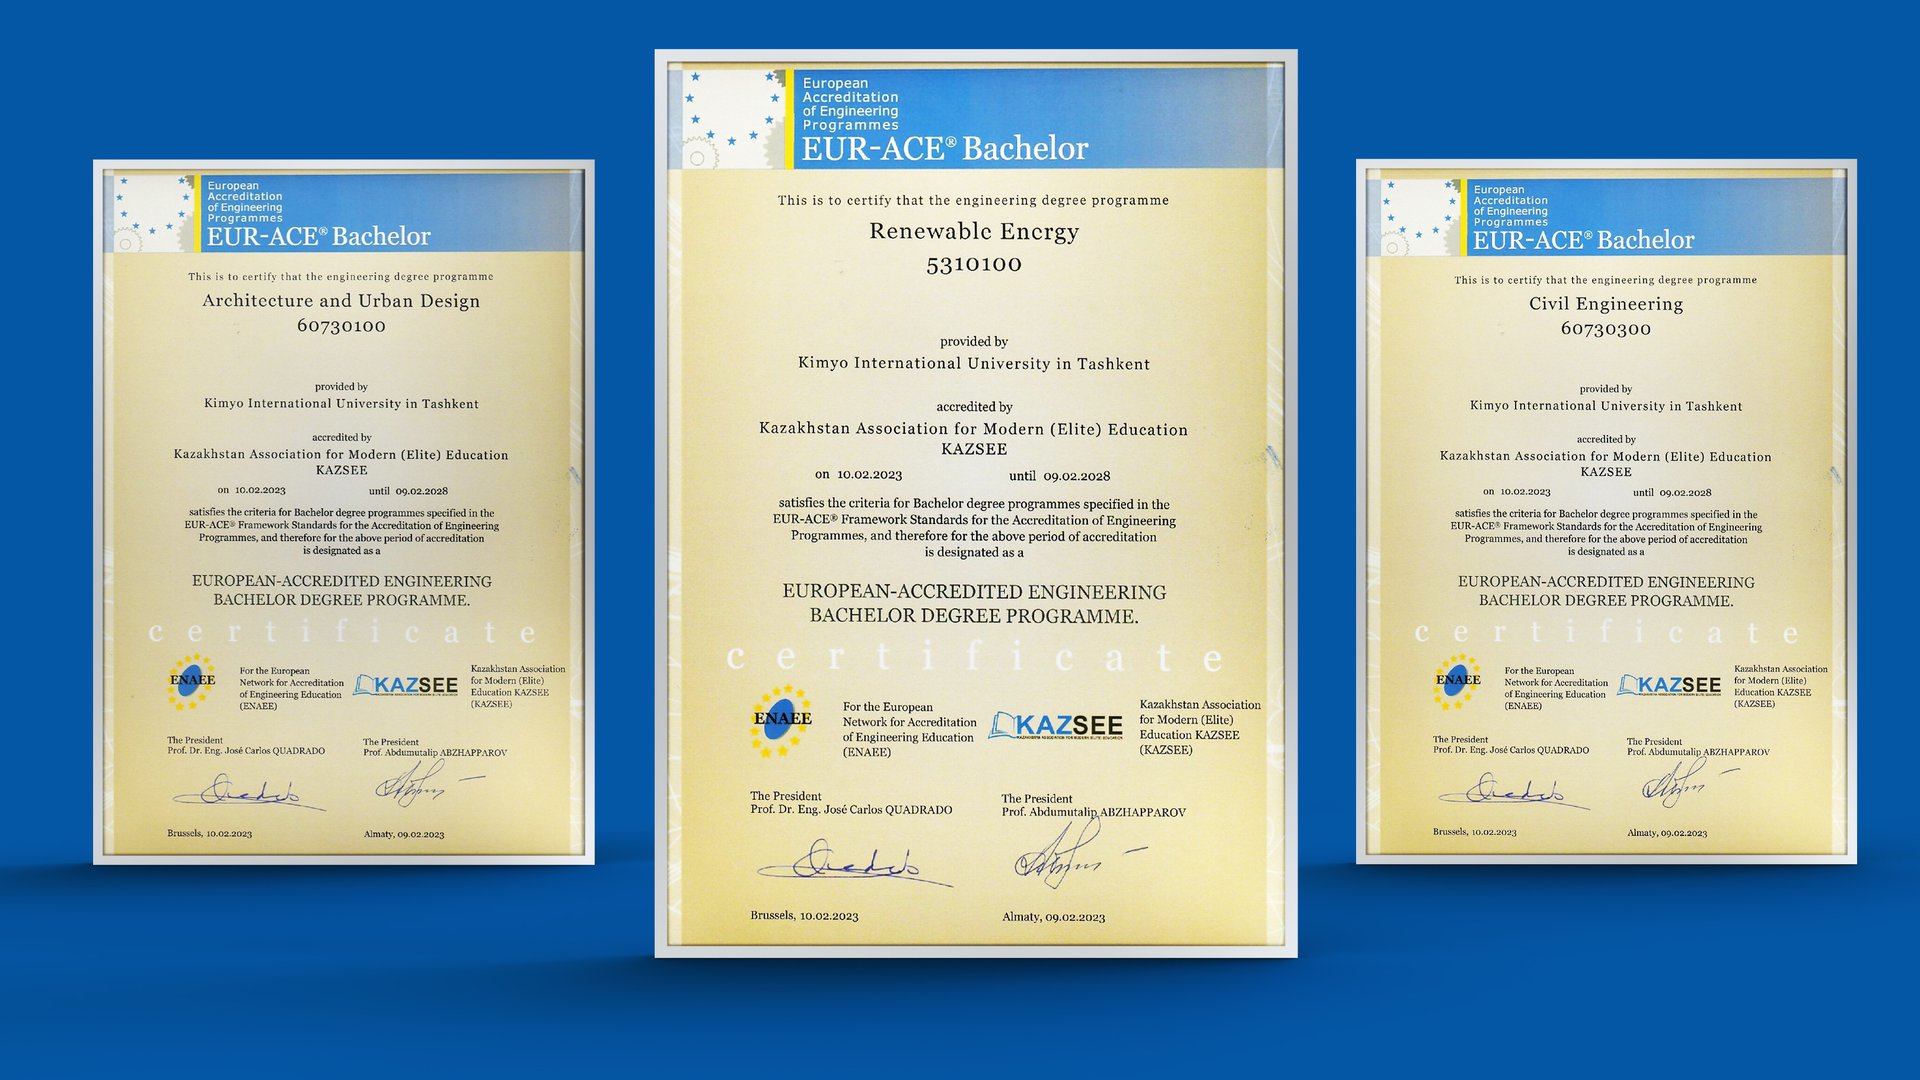 Renewable Energy, Construction and Architecture and Urban Design faculties of Kimyo International University in Tashkent became the first programs of the School of Engineering that received the European quality label for engineering degree programs EUR-AC